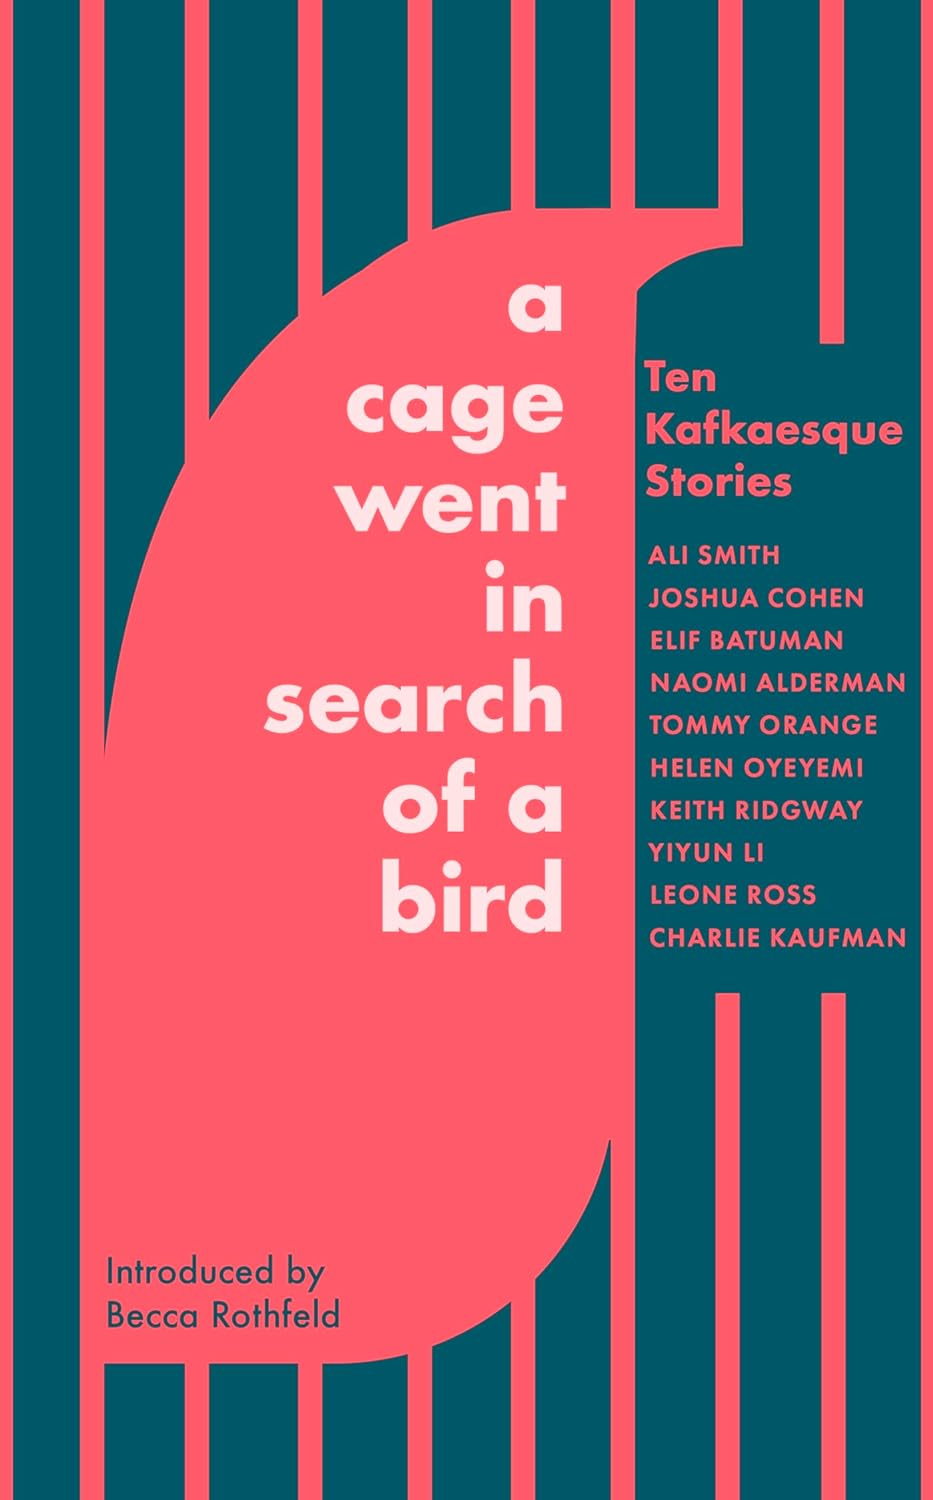 A_Cage_Went_In_Search_of_A_Bird_book_cover